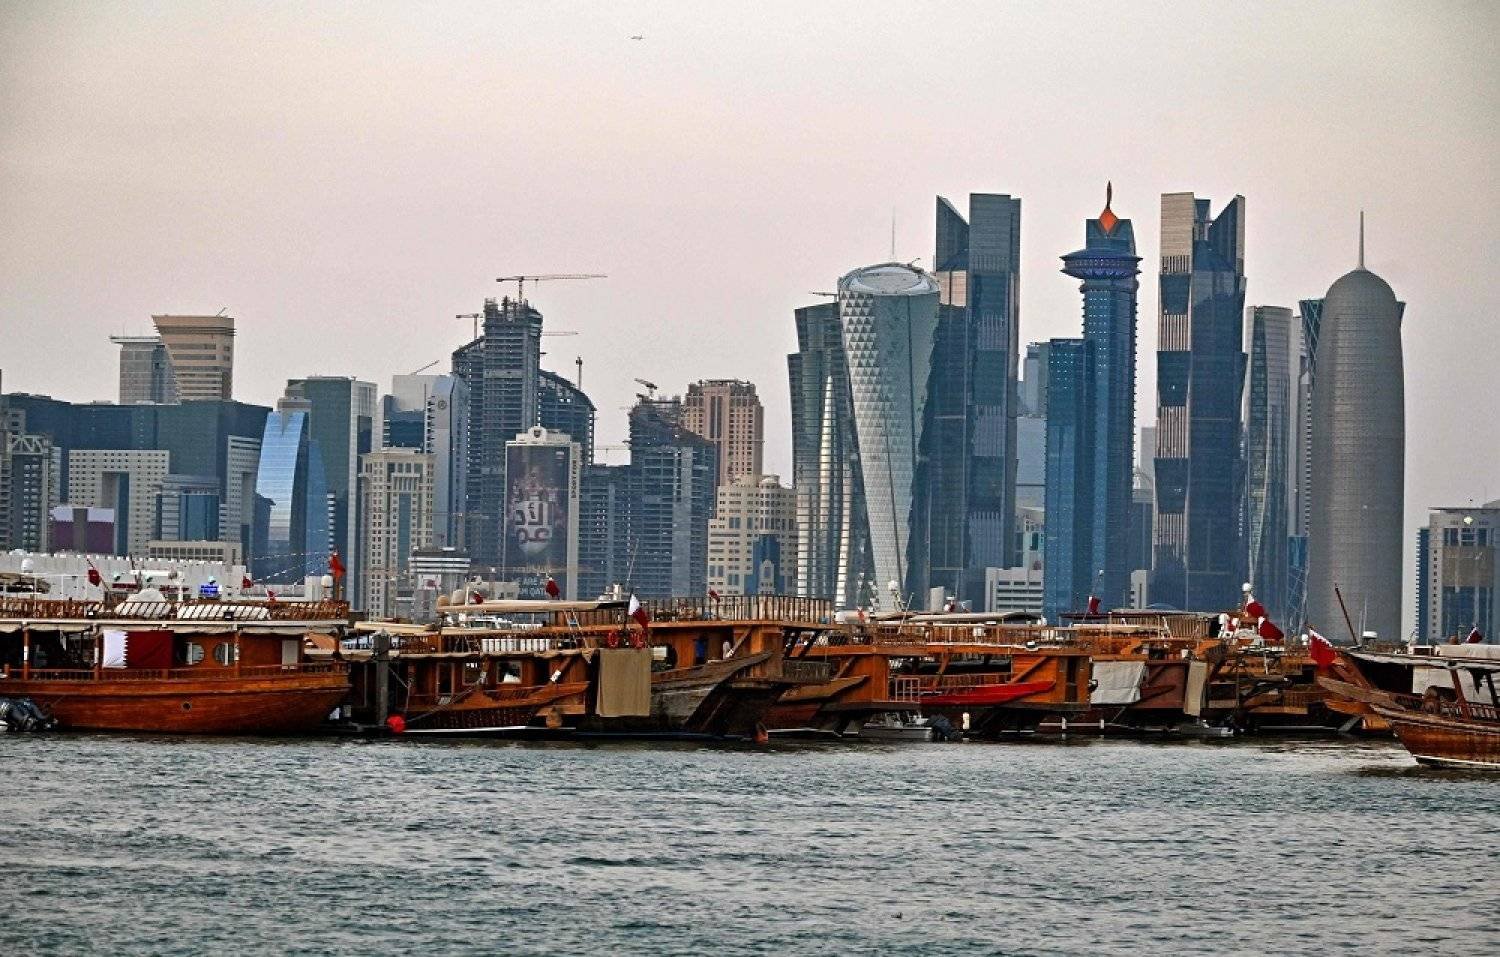 This file photo taken on Dec. 20, 2019, shows a view of boats moored in front of high-rise buildings in the Qatari capital, Doha. (AFP)
